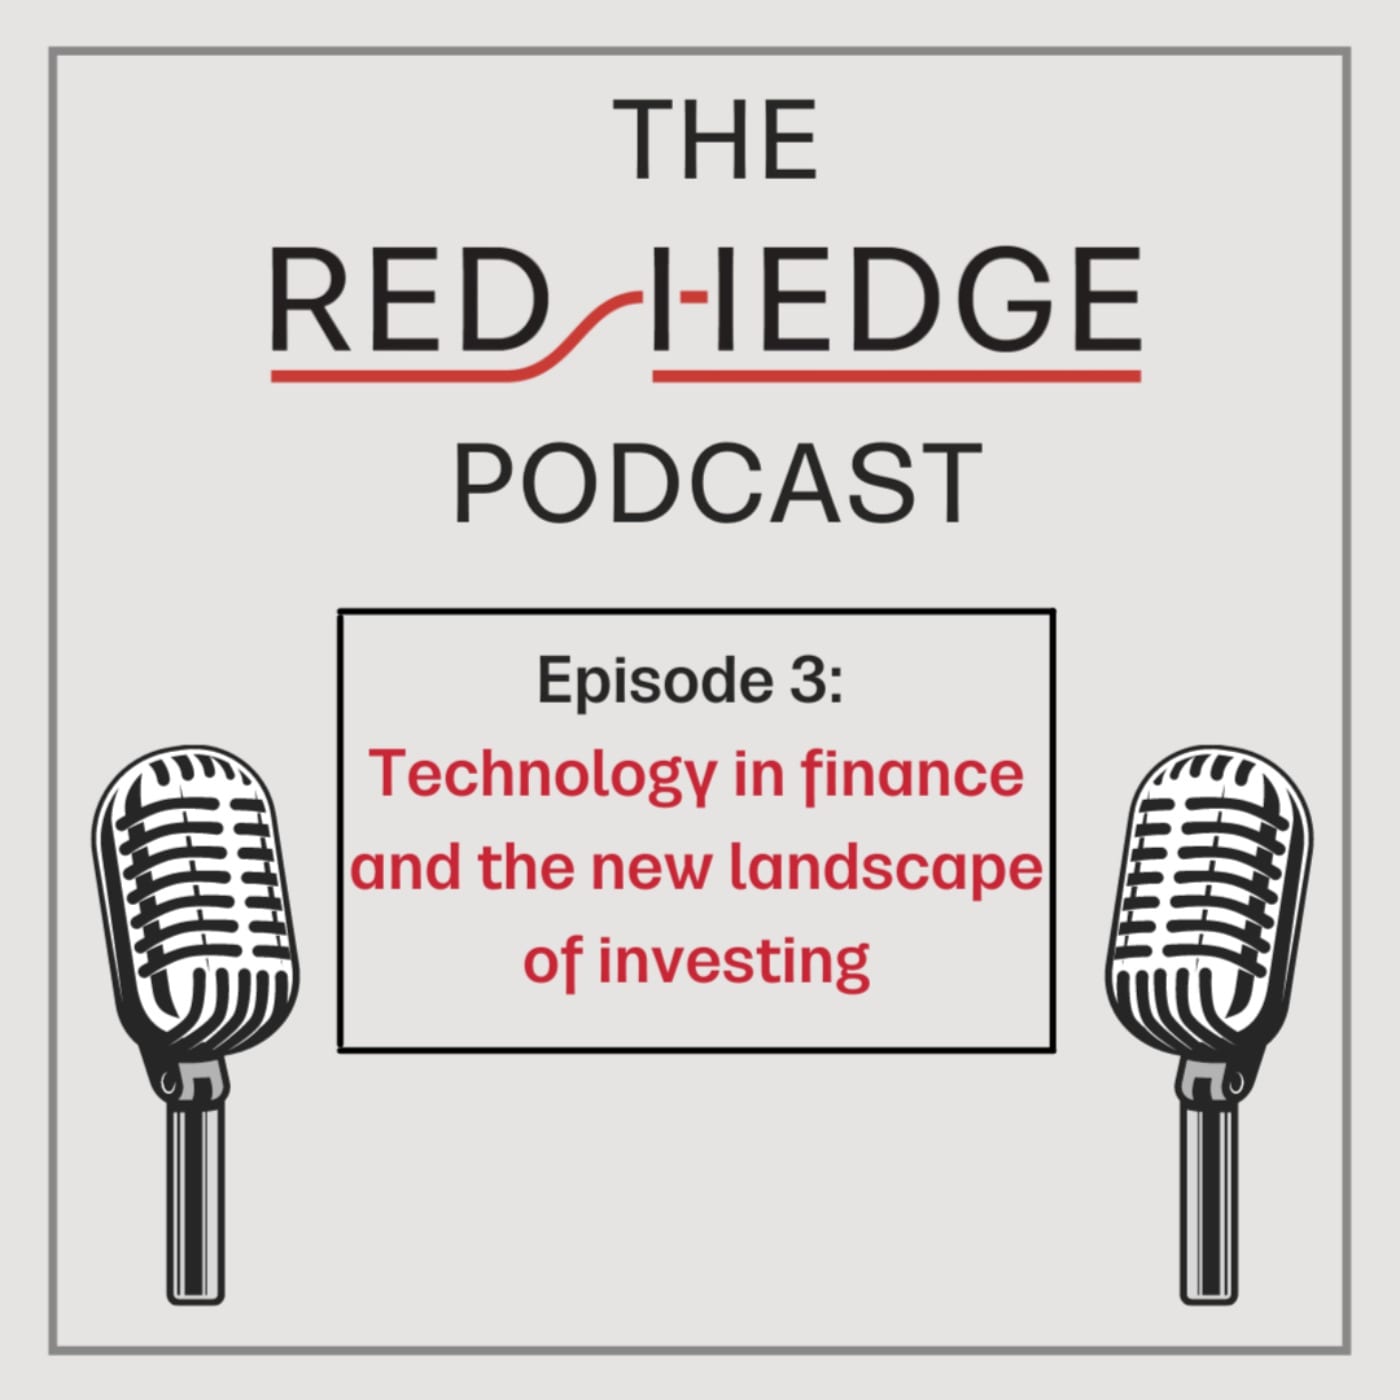 Technology in finance and the new landscape of investing